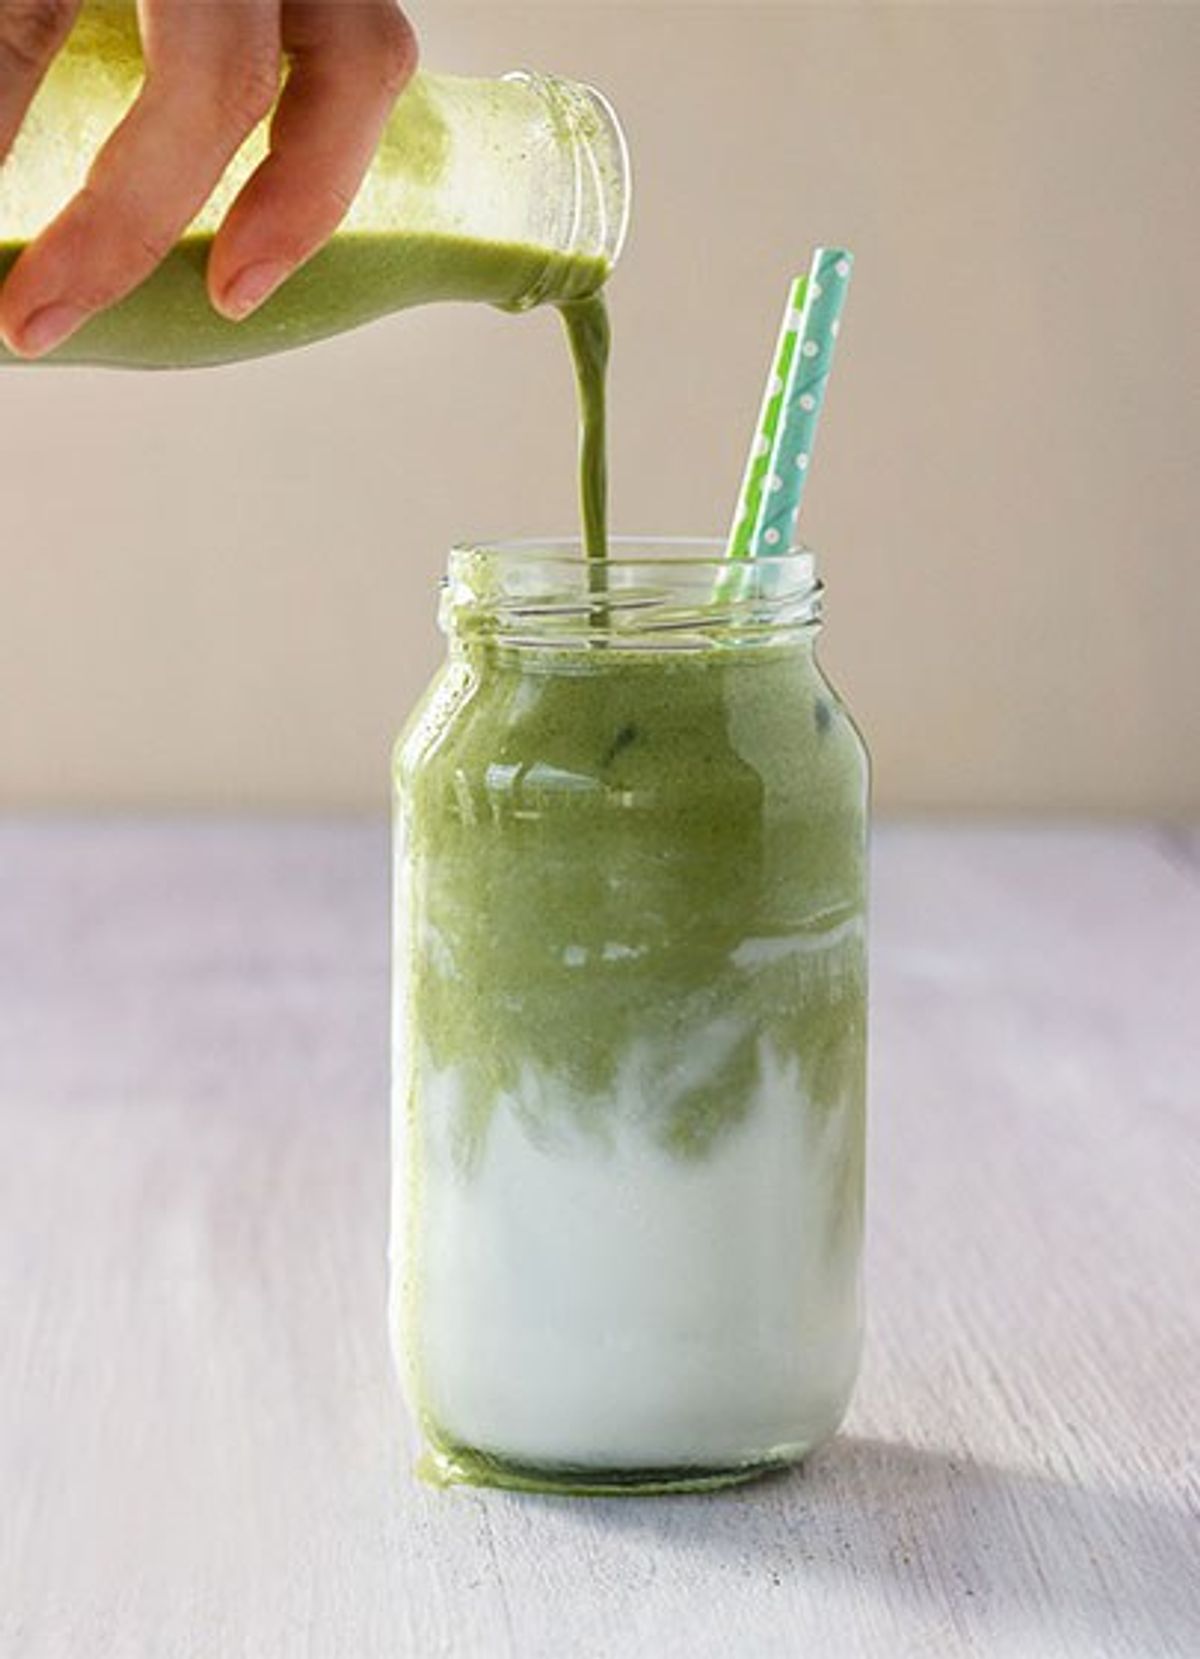 It's "MA-cha": The New Green Drink With Amazing Health Powers